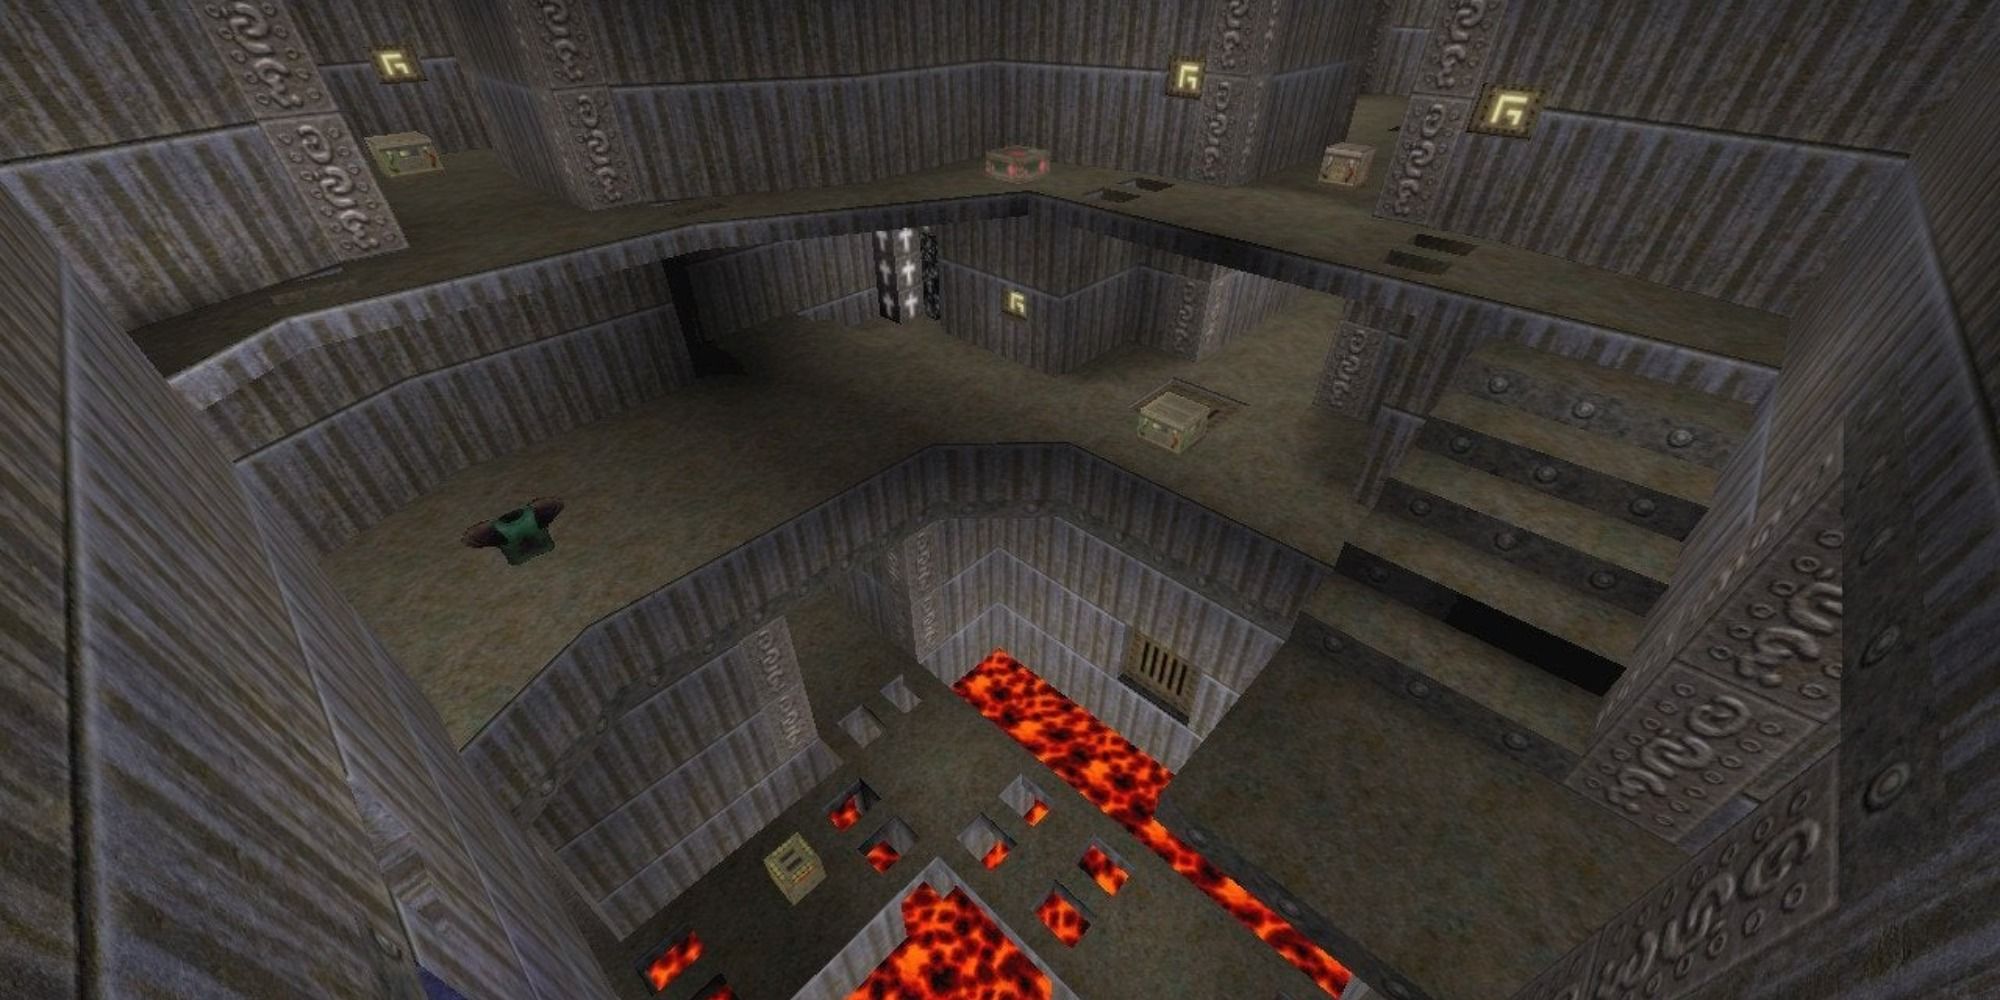 a top-down view of the Quake multiplayer map DM4: The Bad Place with lava floor, and stairs connecting multiple levels